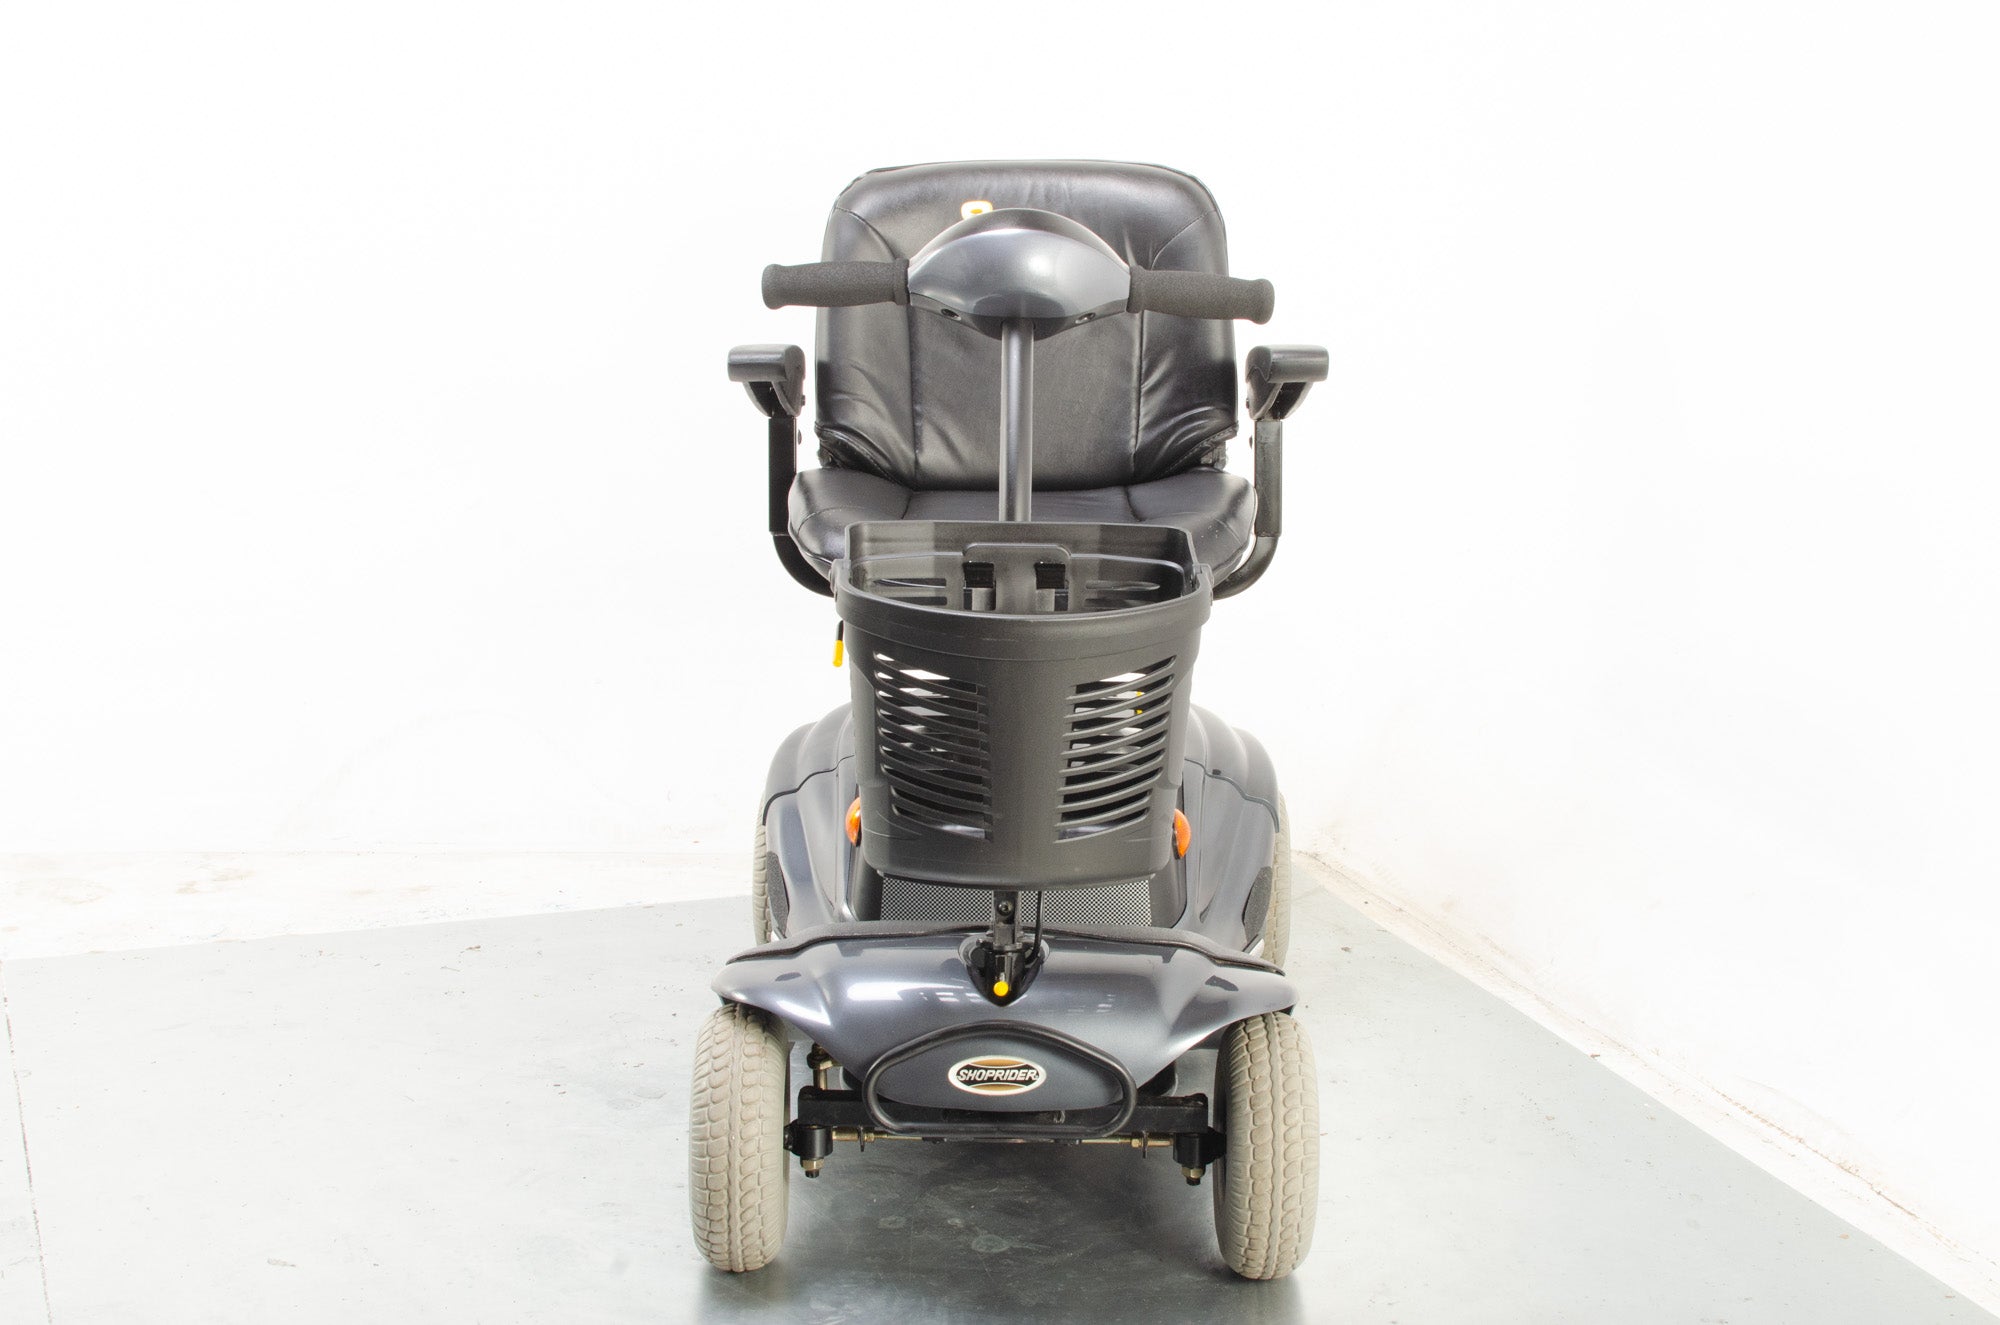 2007 Roma Shoprider Paris 4mph Transportable Mobility Boot Scooter in Grey